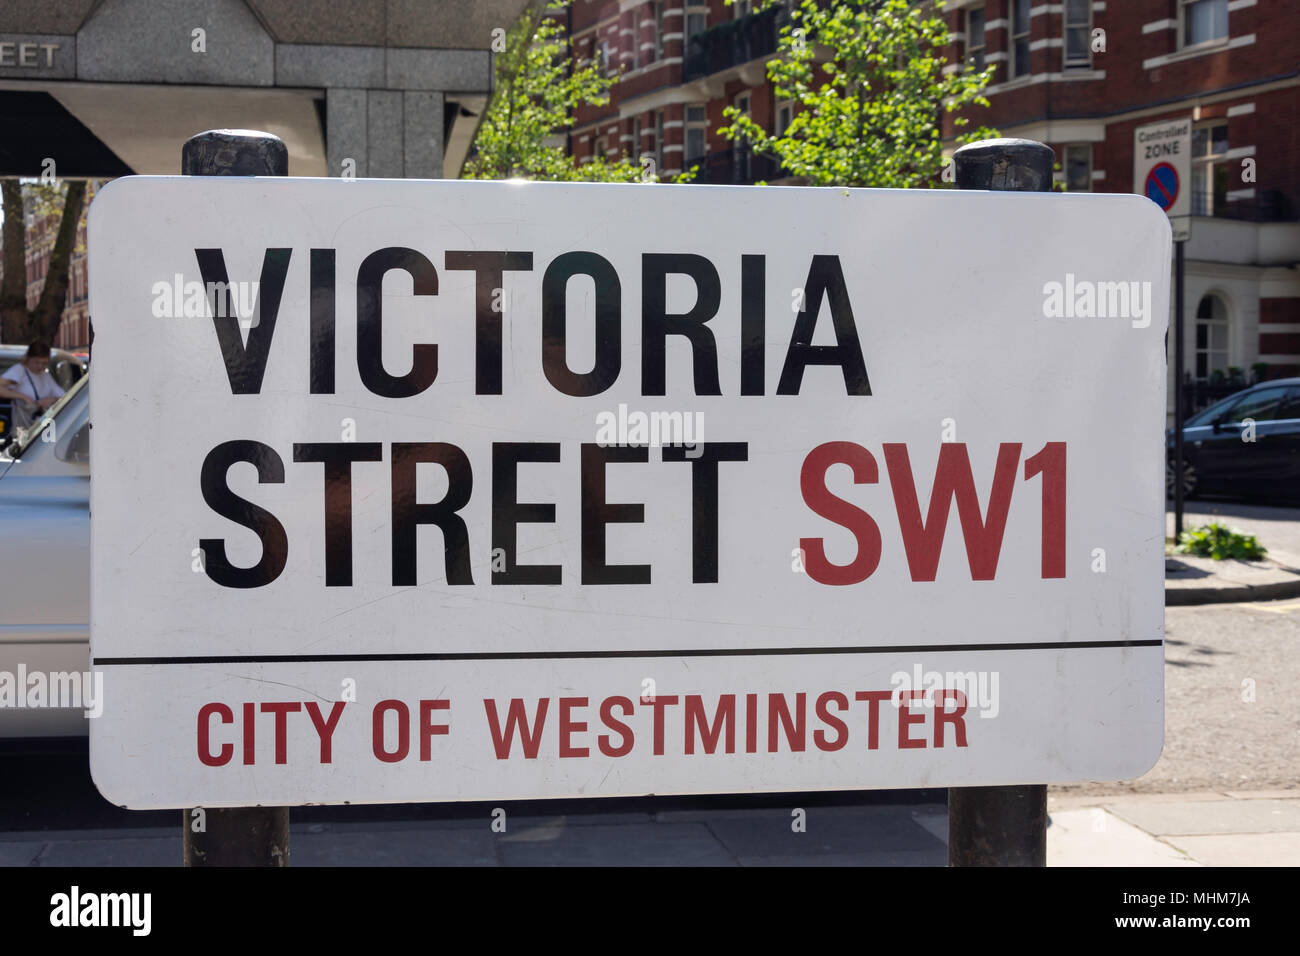 Street sign, Victoria Street, Victoria, City of Westminster, Greater London, England, United Kingdom Stock Photo